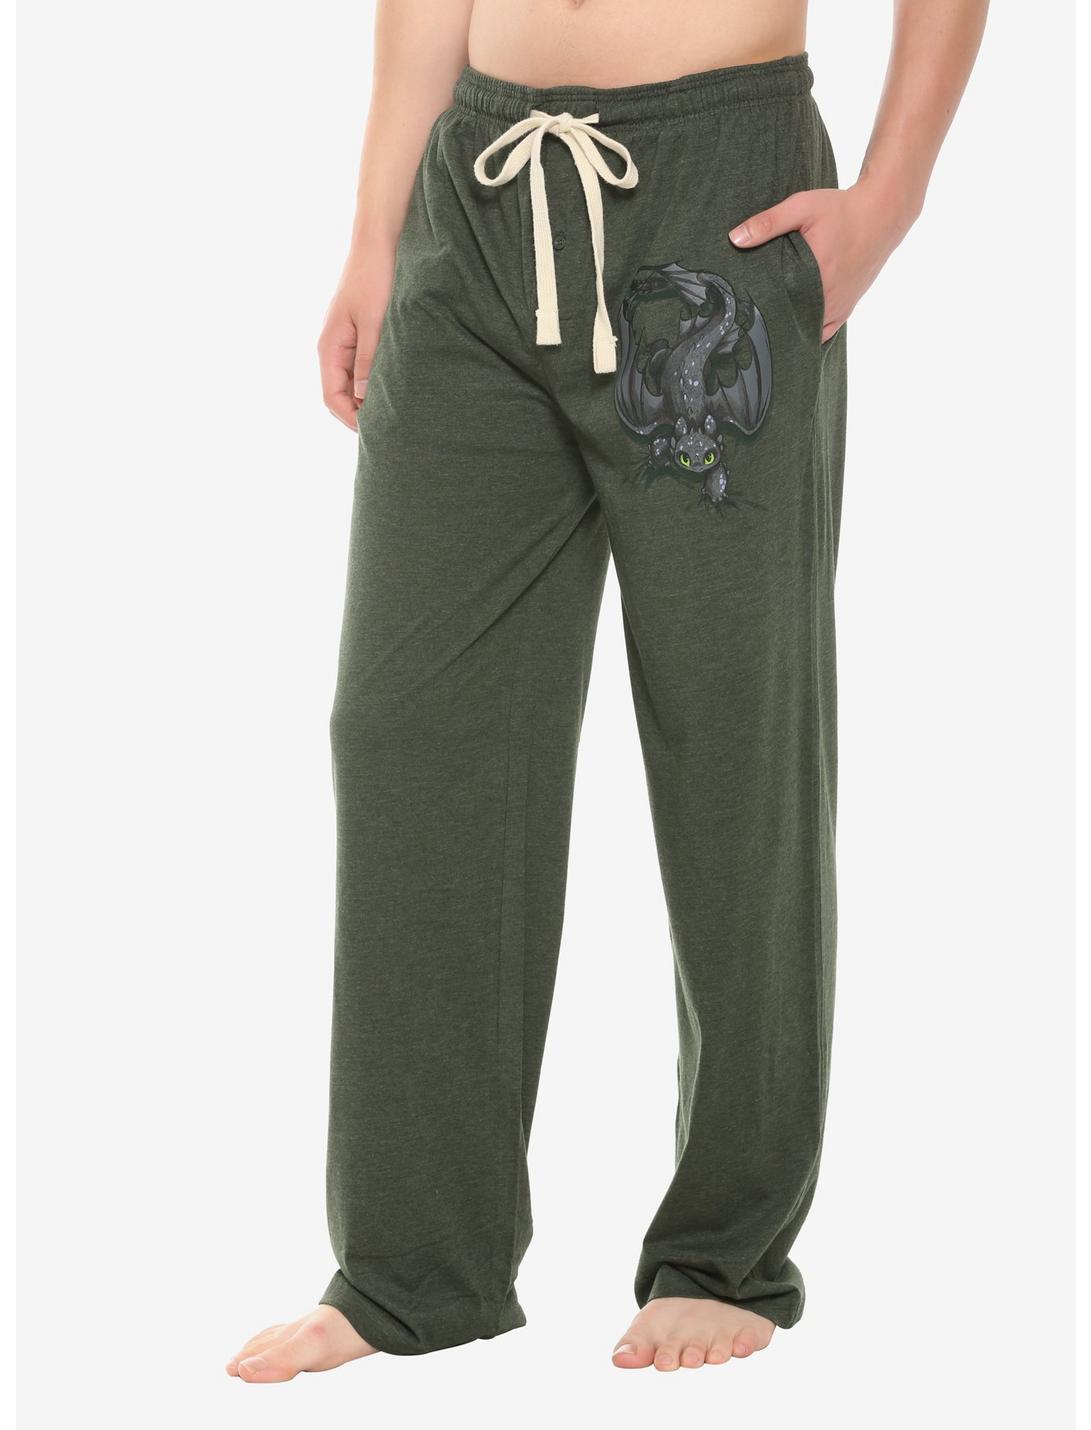 How To Train Your Dragon Toothless Pajama Pants, MULTI, hi-res